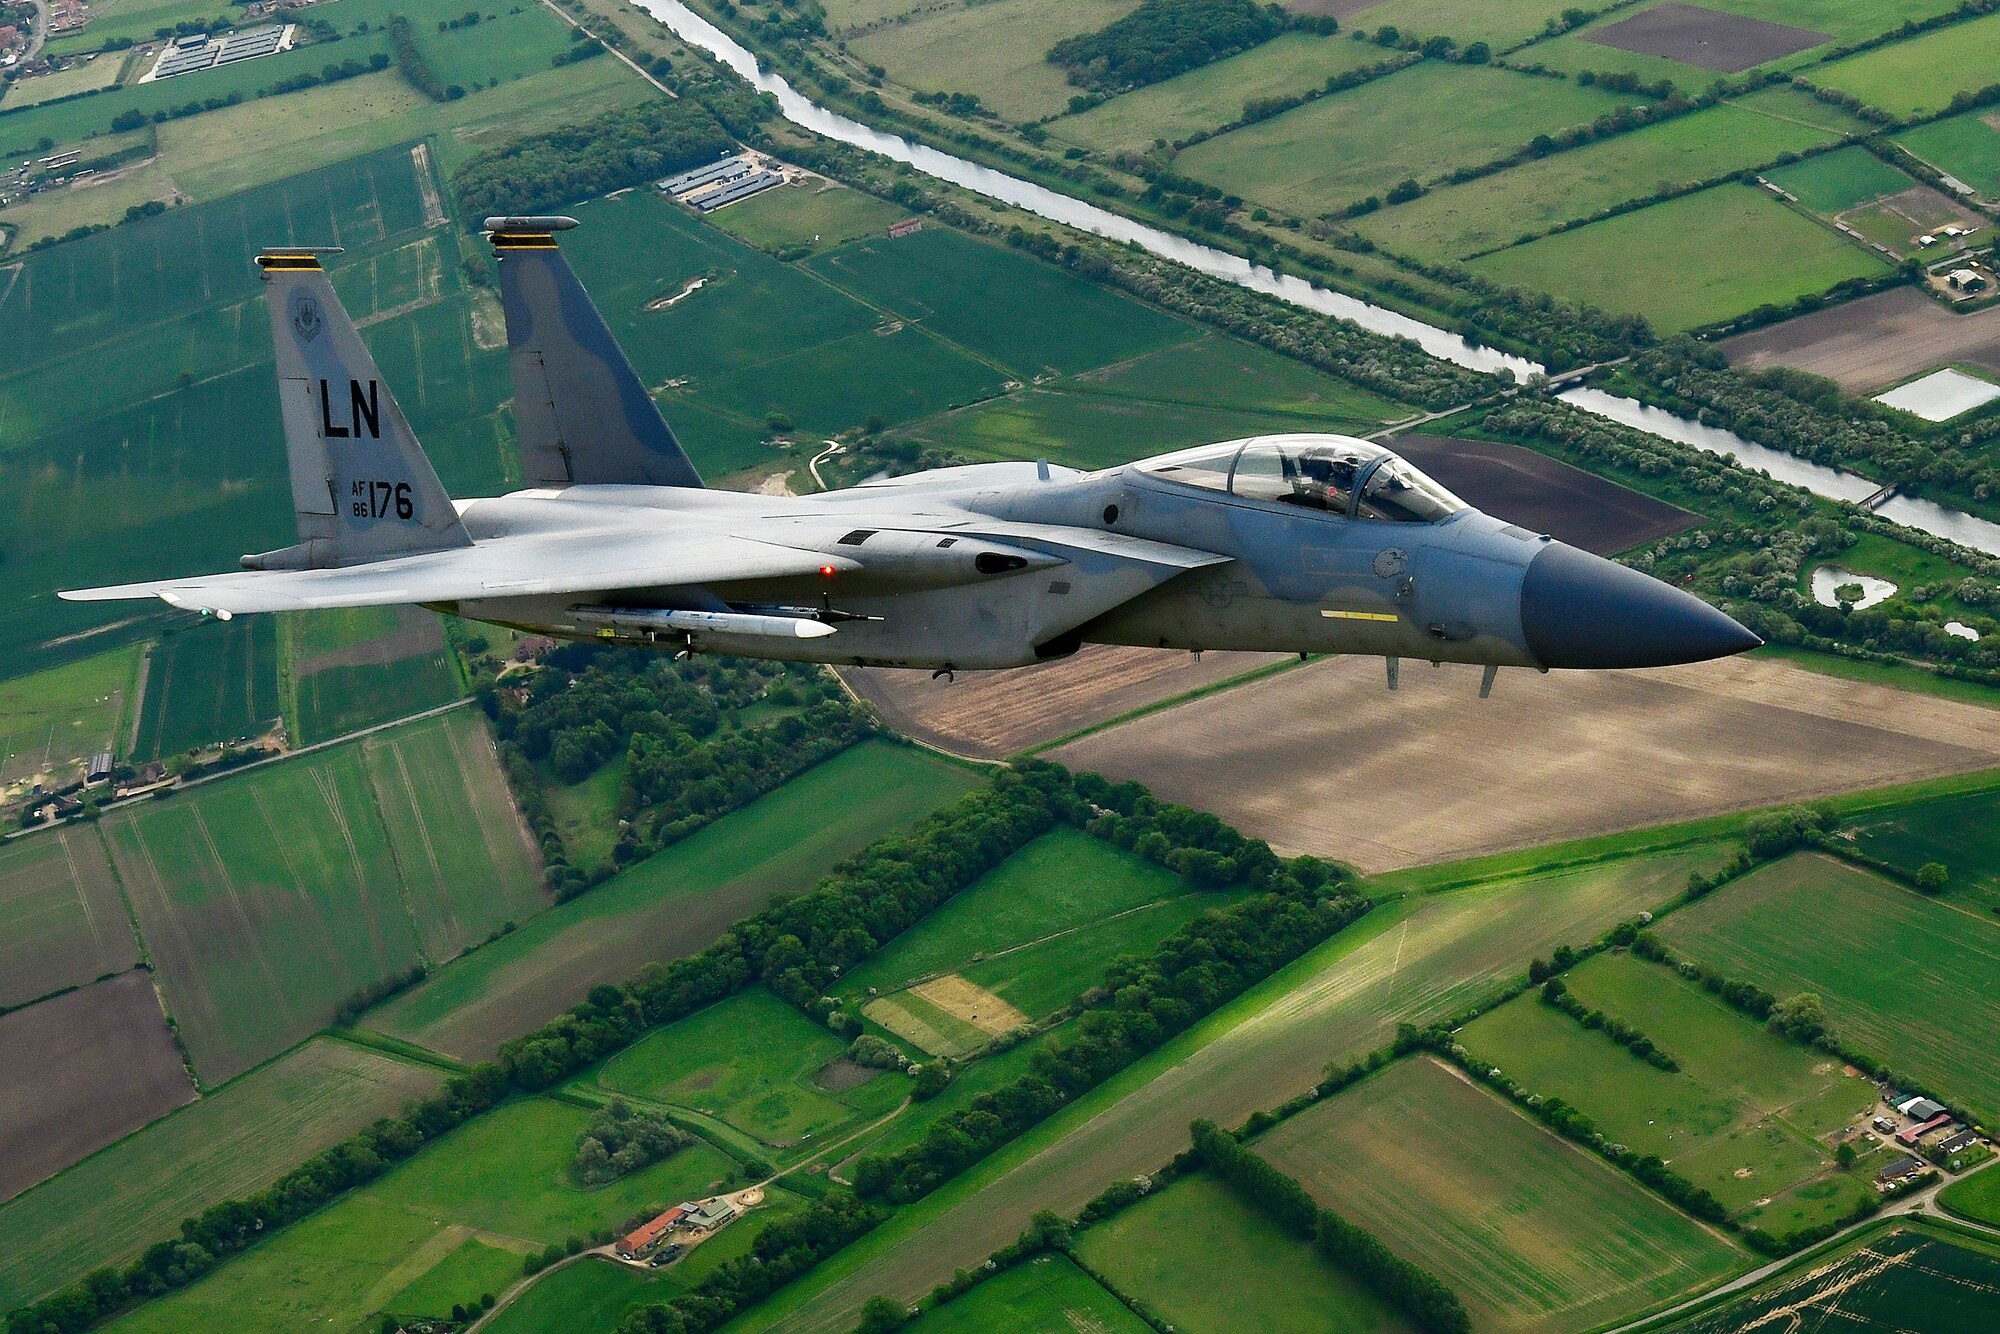 An F-15C Eagle assigned to the 493rd Fighter Squadron conducts aerial operations in support of exercise Point Blank 20-02 over East Anglia, May 12, 2020. The joint event, held quarterly between the Royal Air Force and U.S. Air Forces stationed in the United Kingdom was the first to be conducted amid the COVID-19 pandemic. (U.S. Air Force photo/ Master Sgt. Matthew Plew)